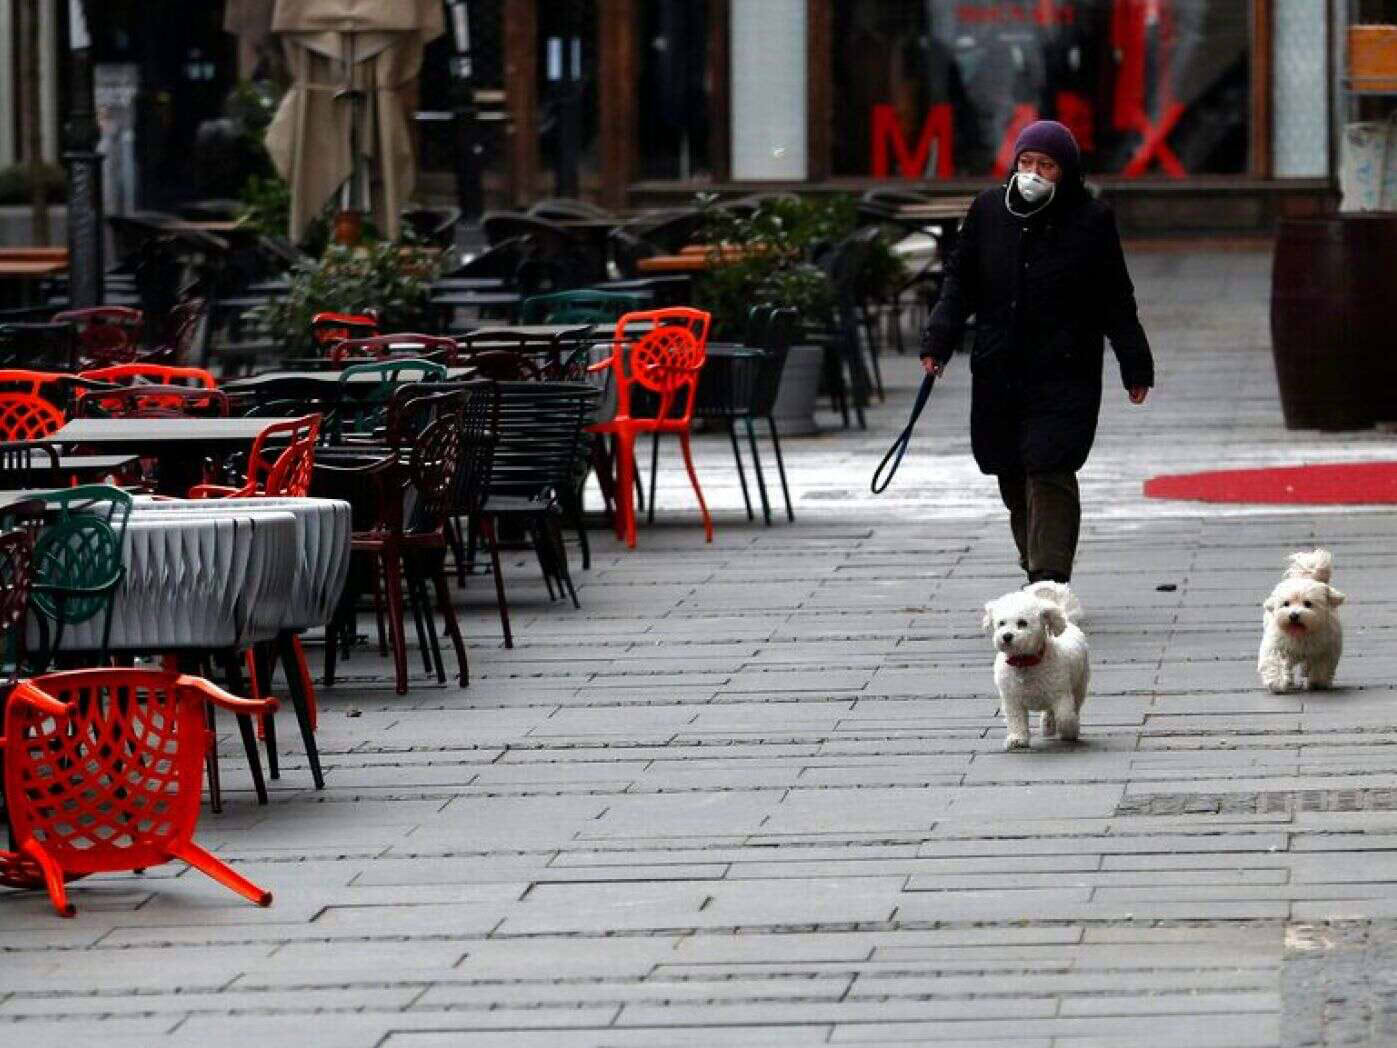 Serbia’s dog walking ban sparks outrage among pet owners